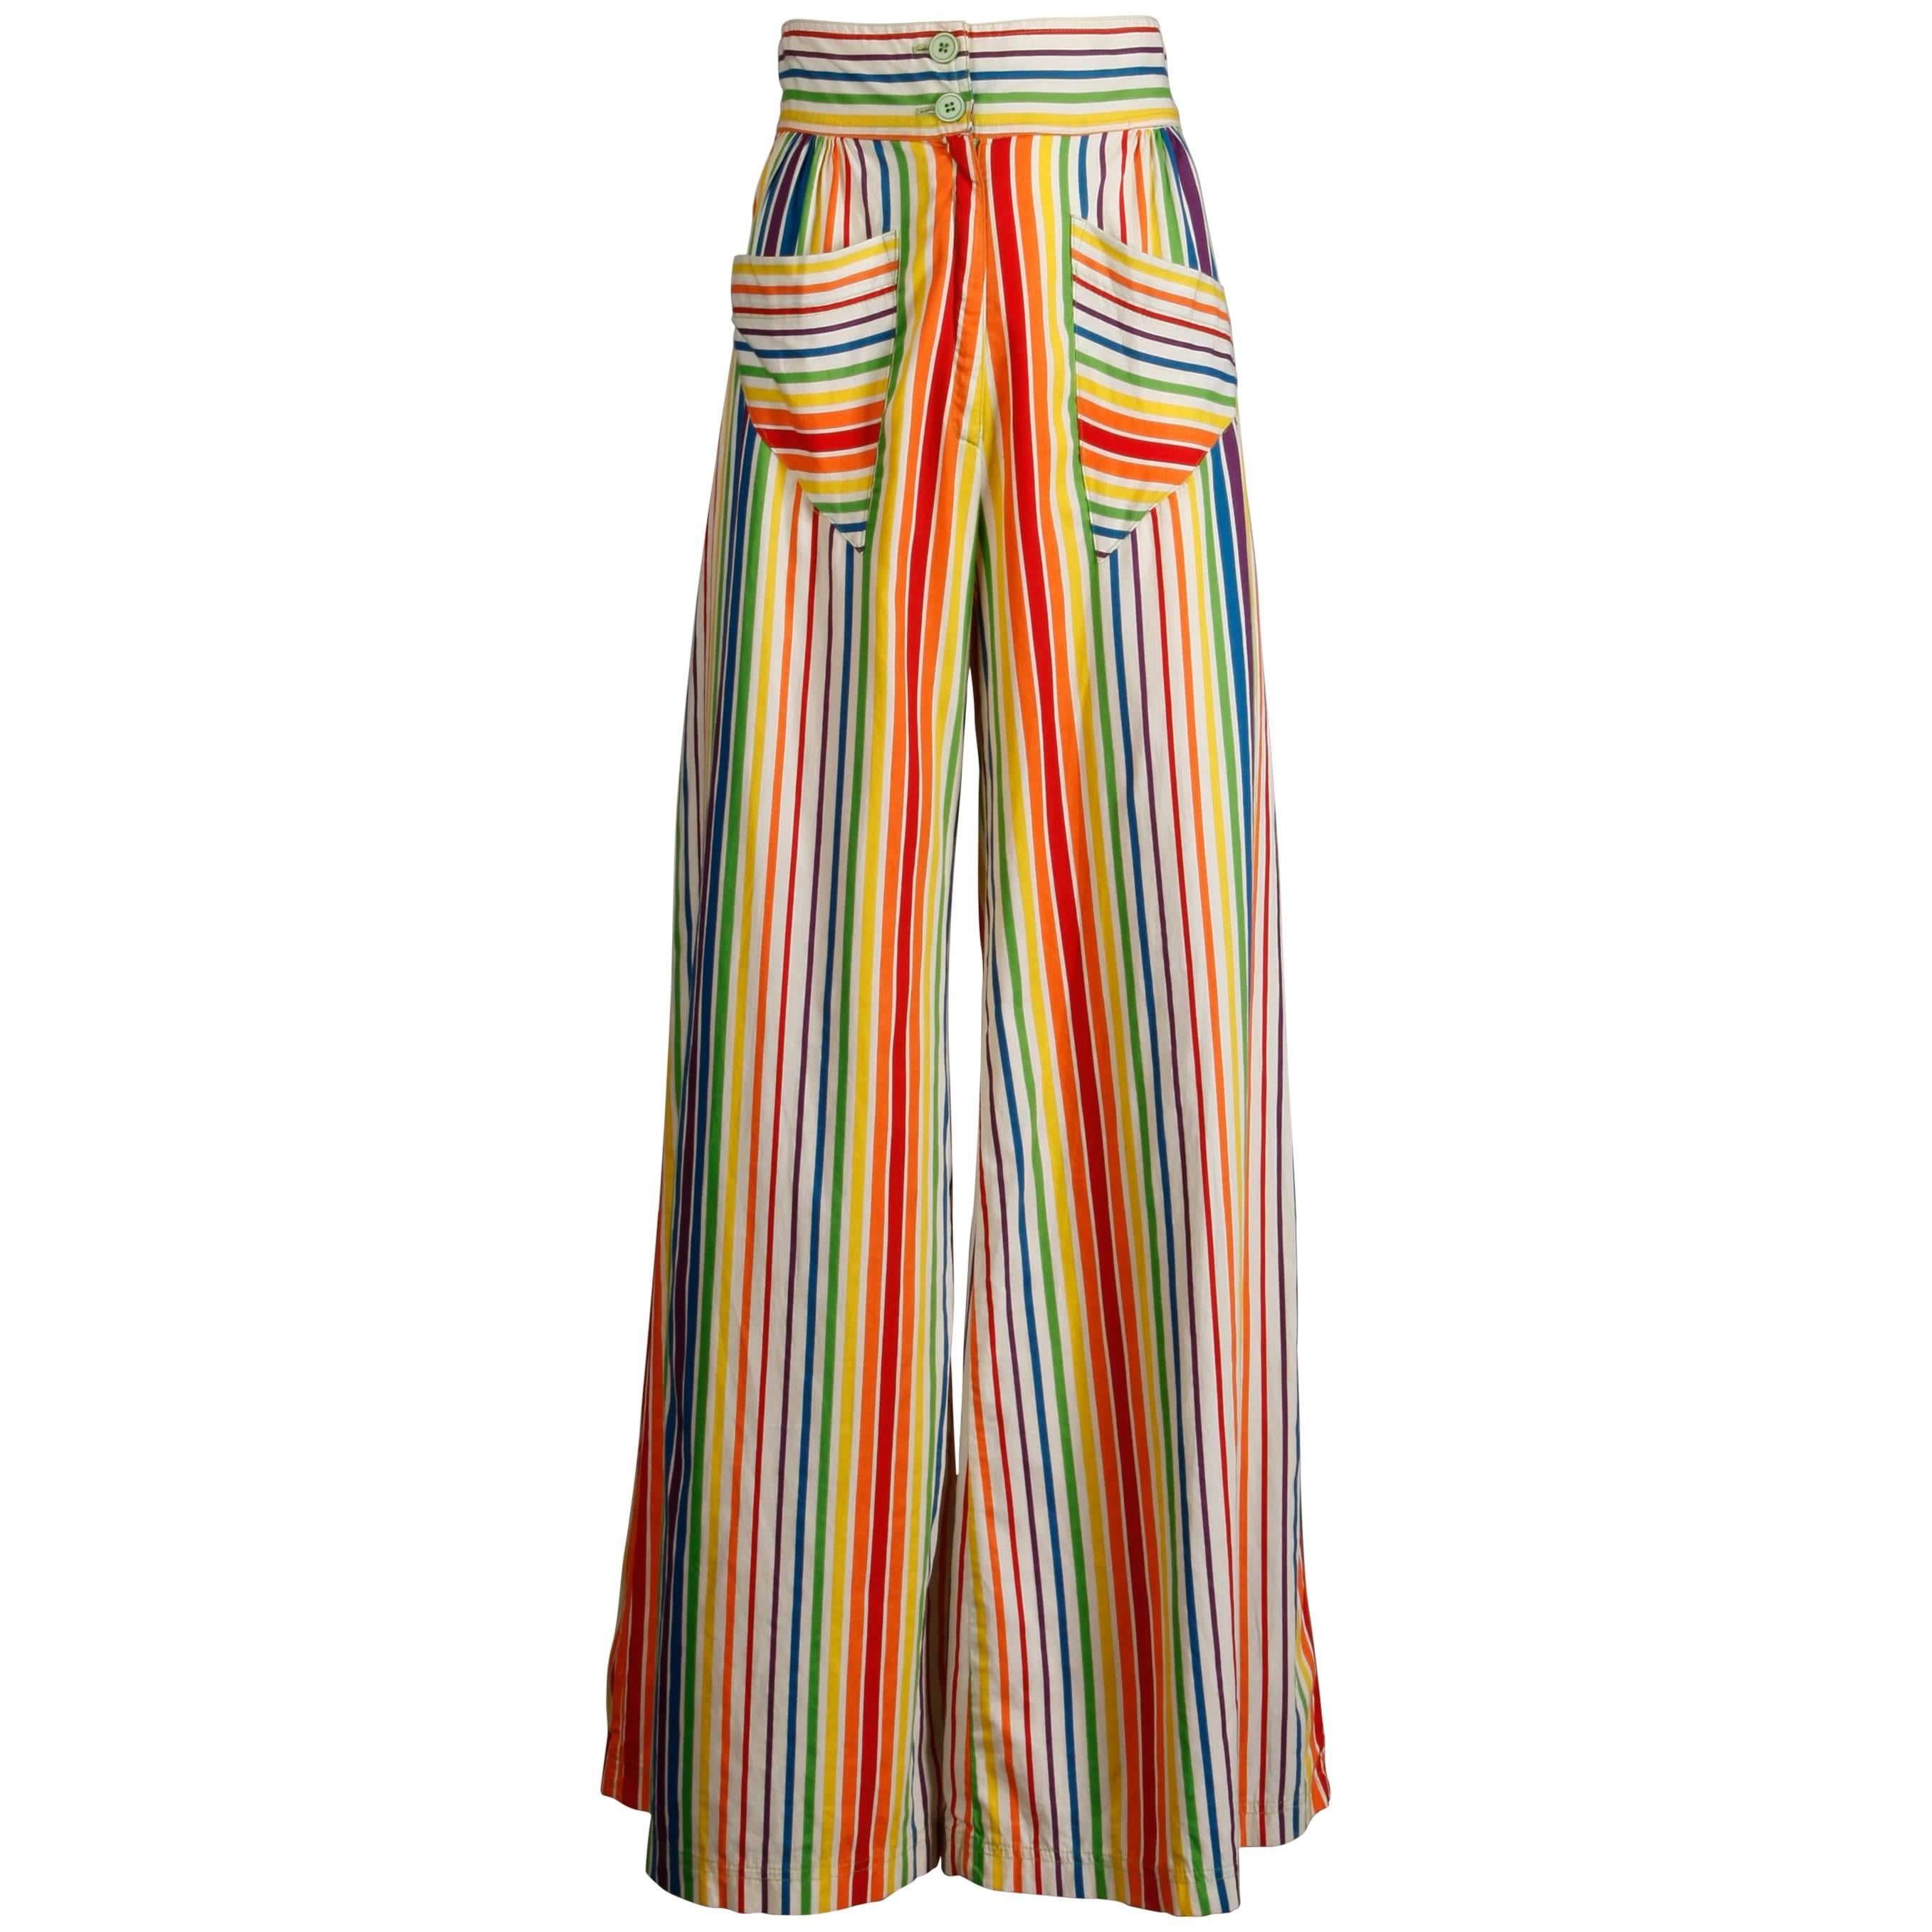 Betsey Johnson for Alley Cat Vintage Rainbow Striped Palazzo Pants, 1970s